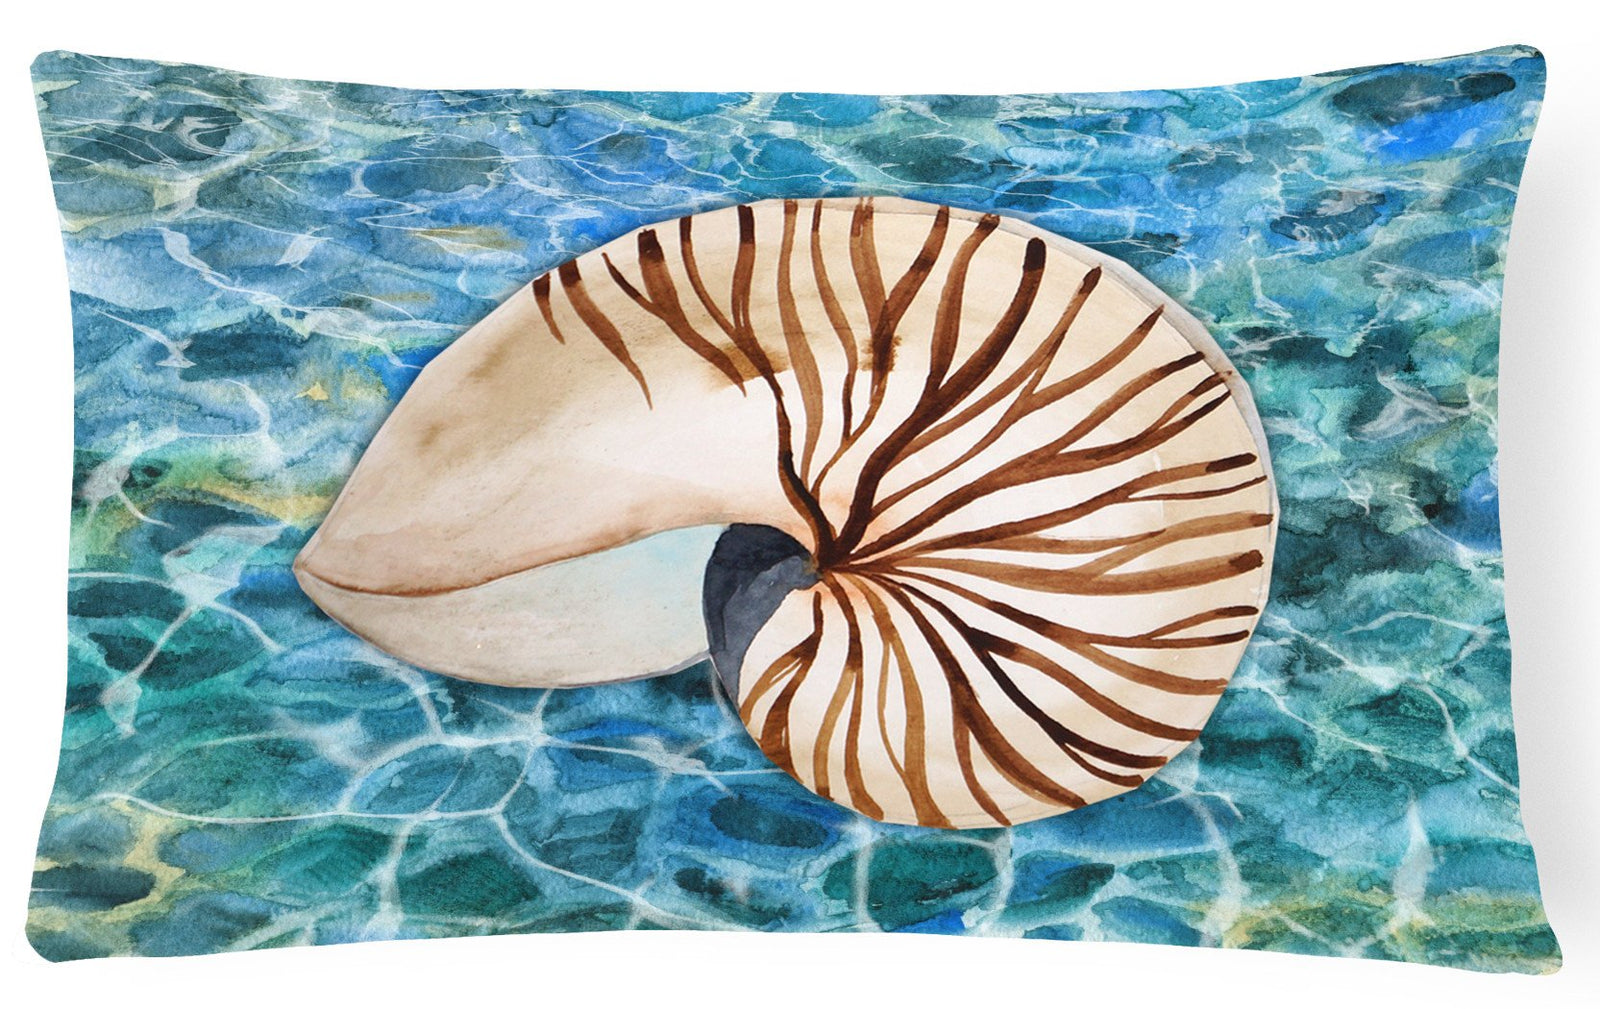 Sea Shell and Water Canvas Fabric Decorative Pillow BB5368PW1216 by Caroline's Treasures